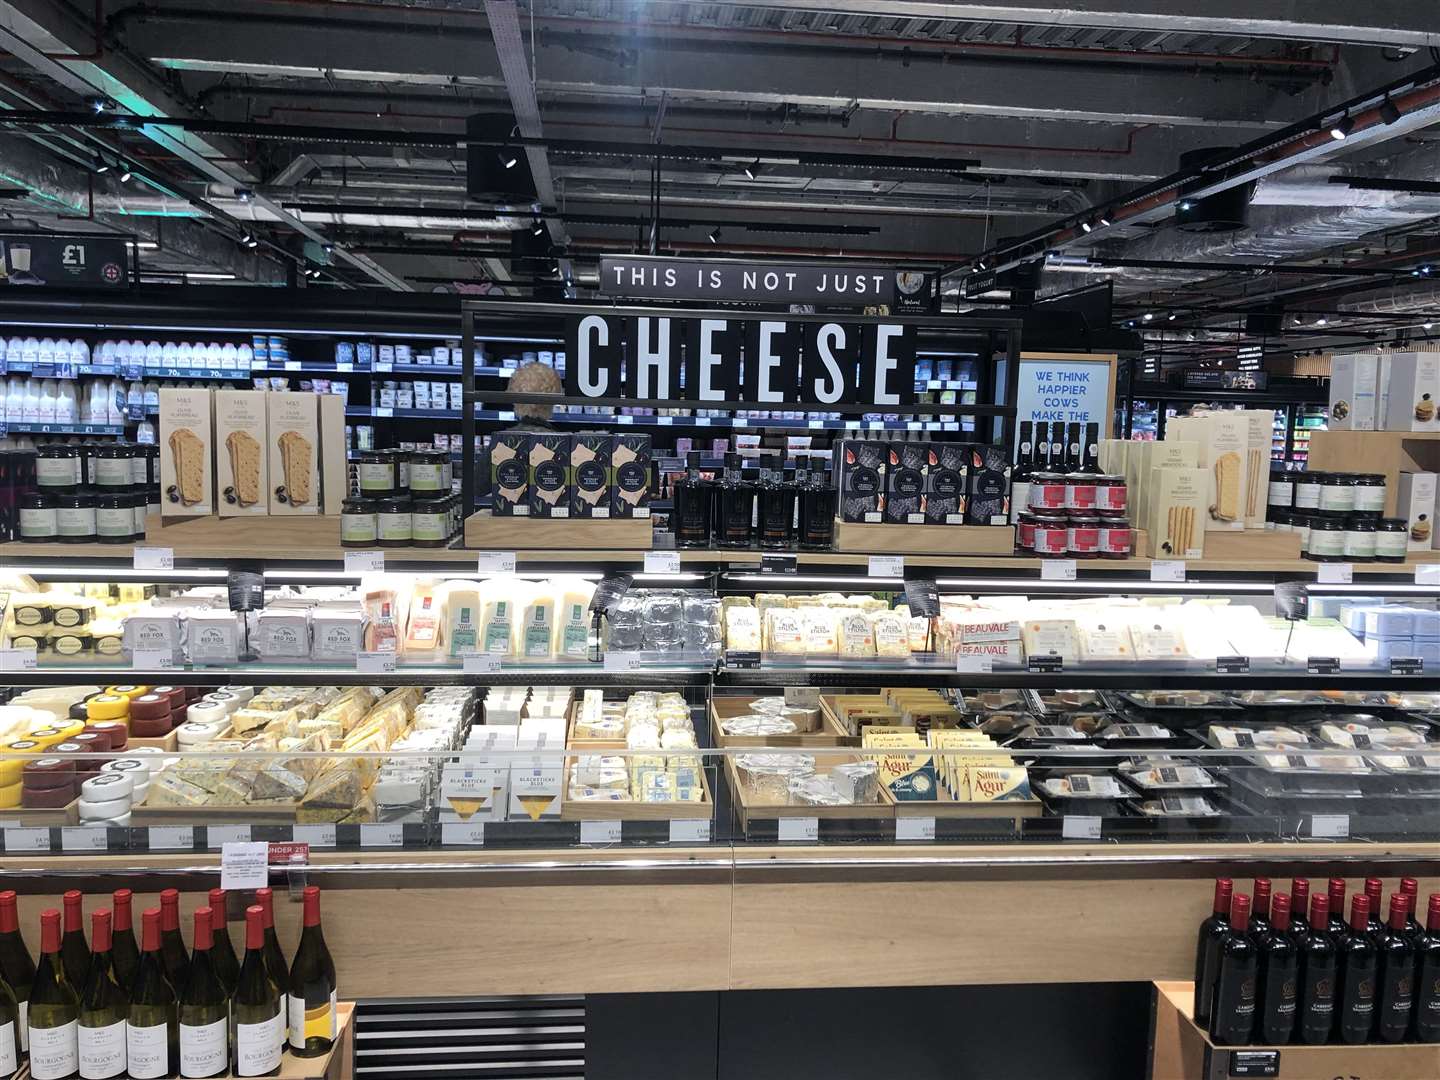 The cheese counter along with crackers and wine